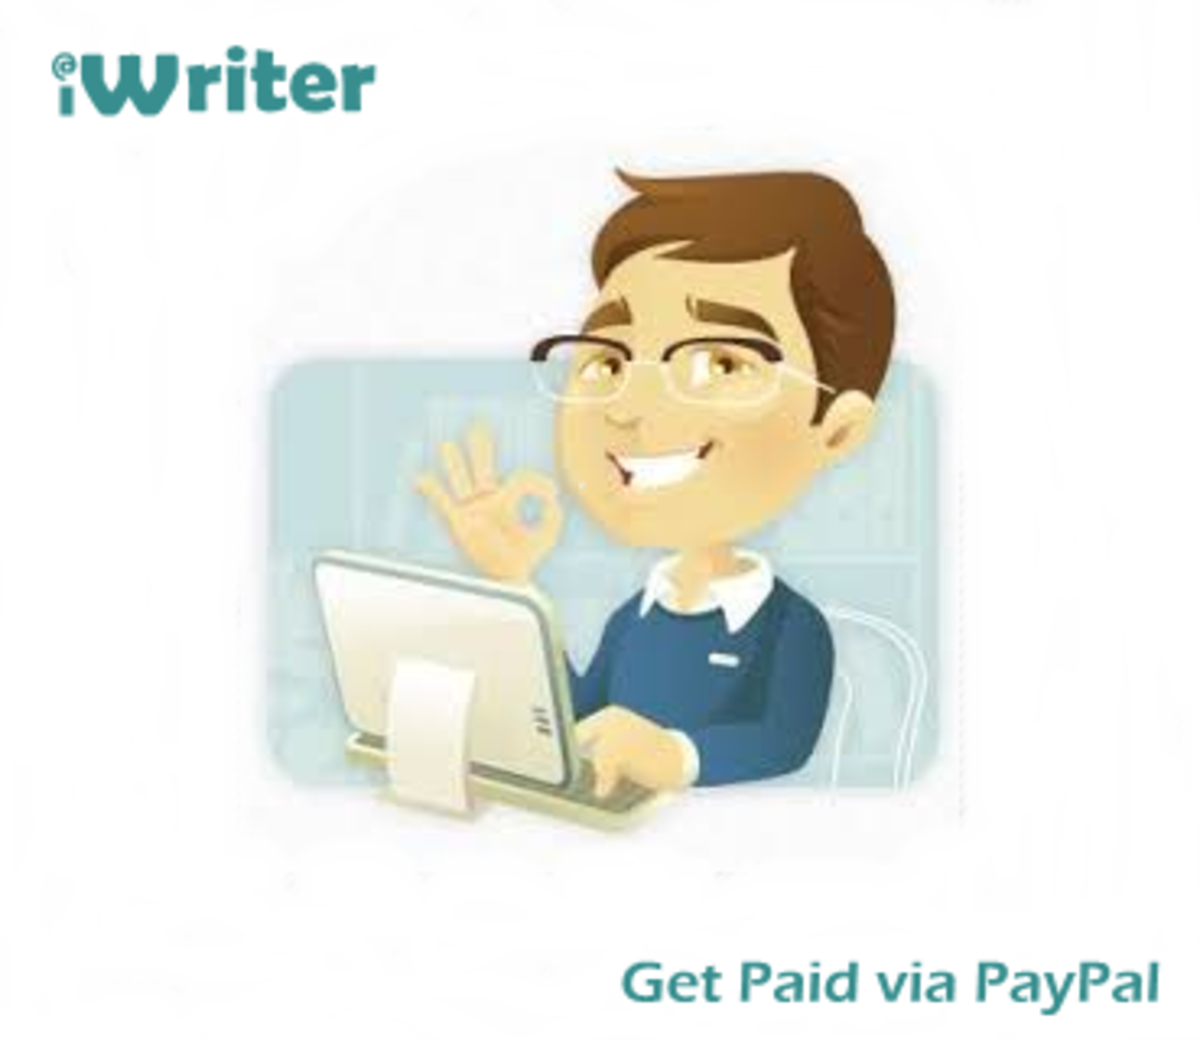 Get payment instantly on your PayPal account